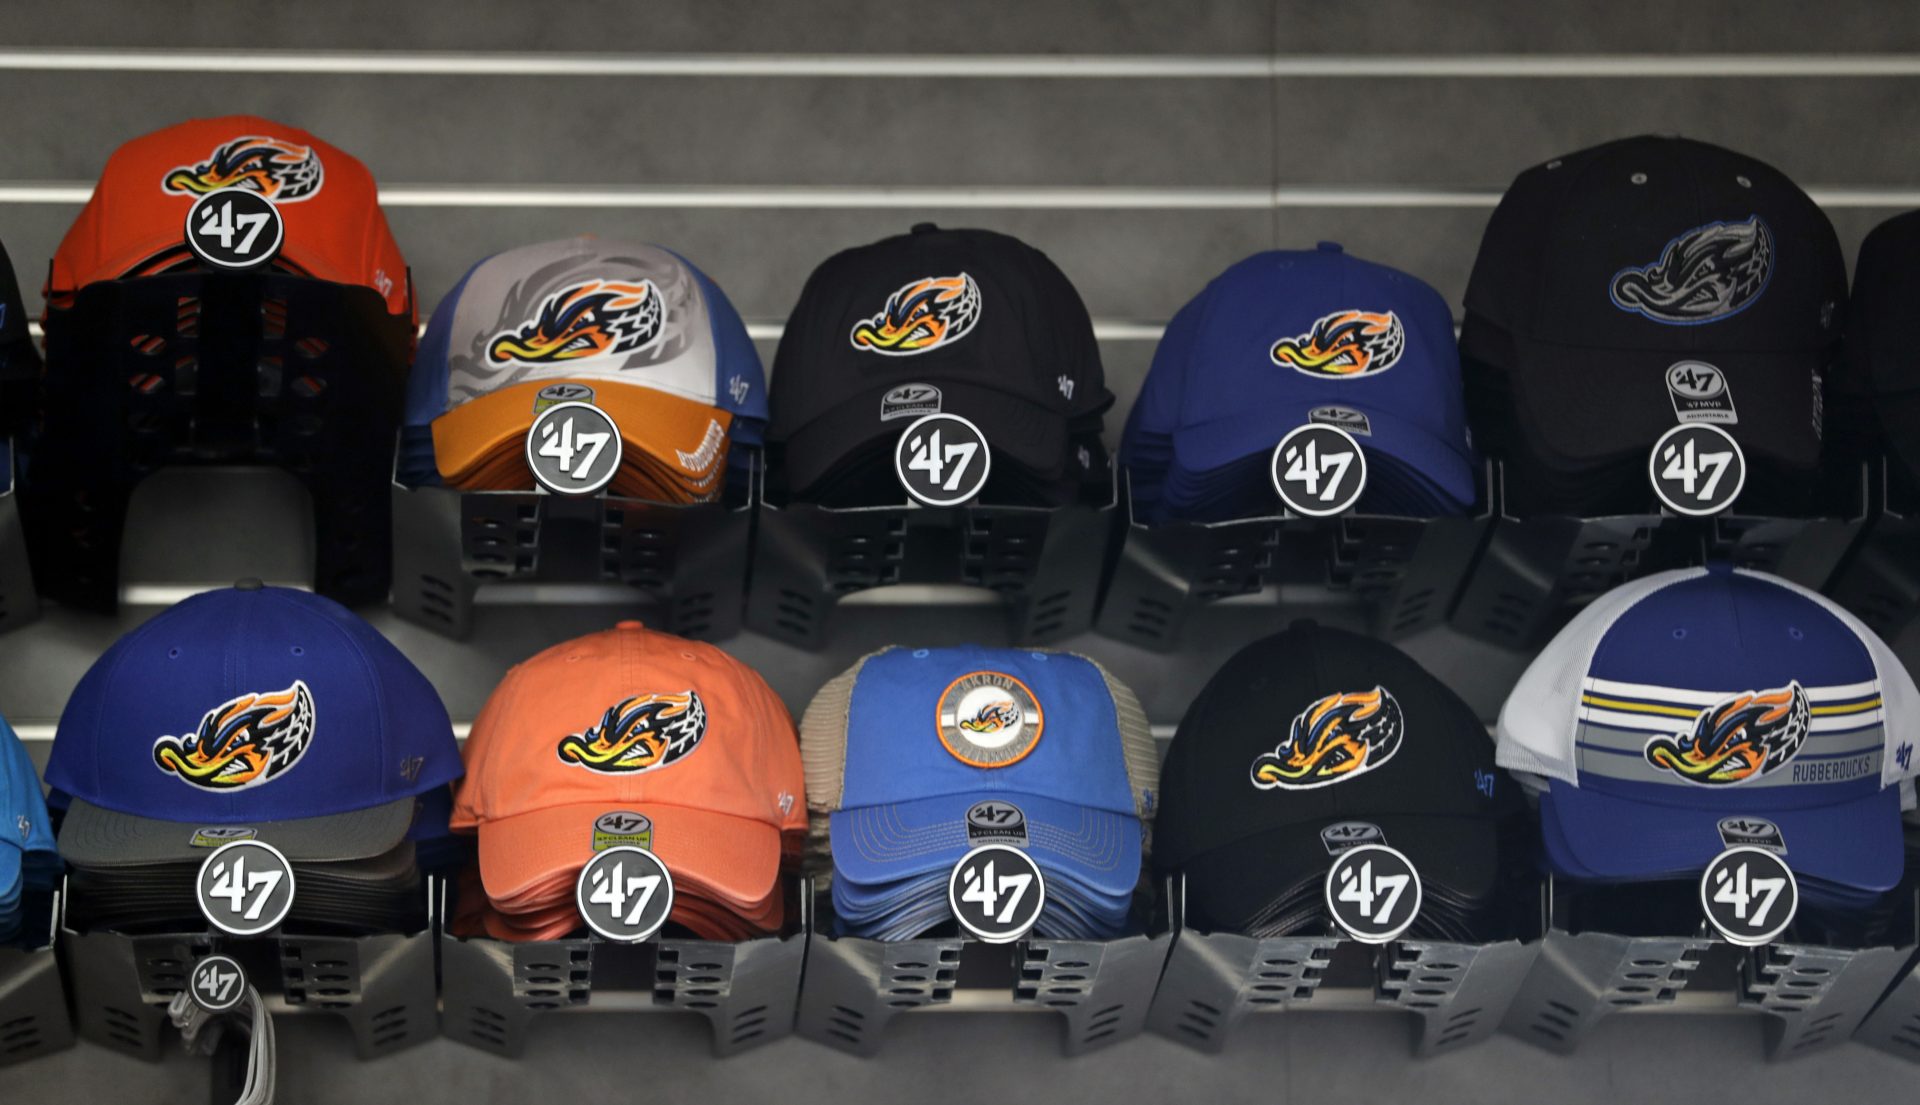 Caps carrying Akron Rubber Ducks branding rest on a shelf at the team shop before a minor-league baseball game between Akron and Bowie, Thursday, April 18, 2019, in Akron, Ohio.